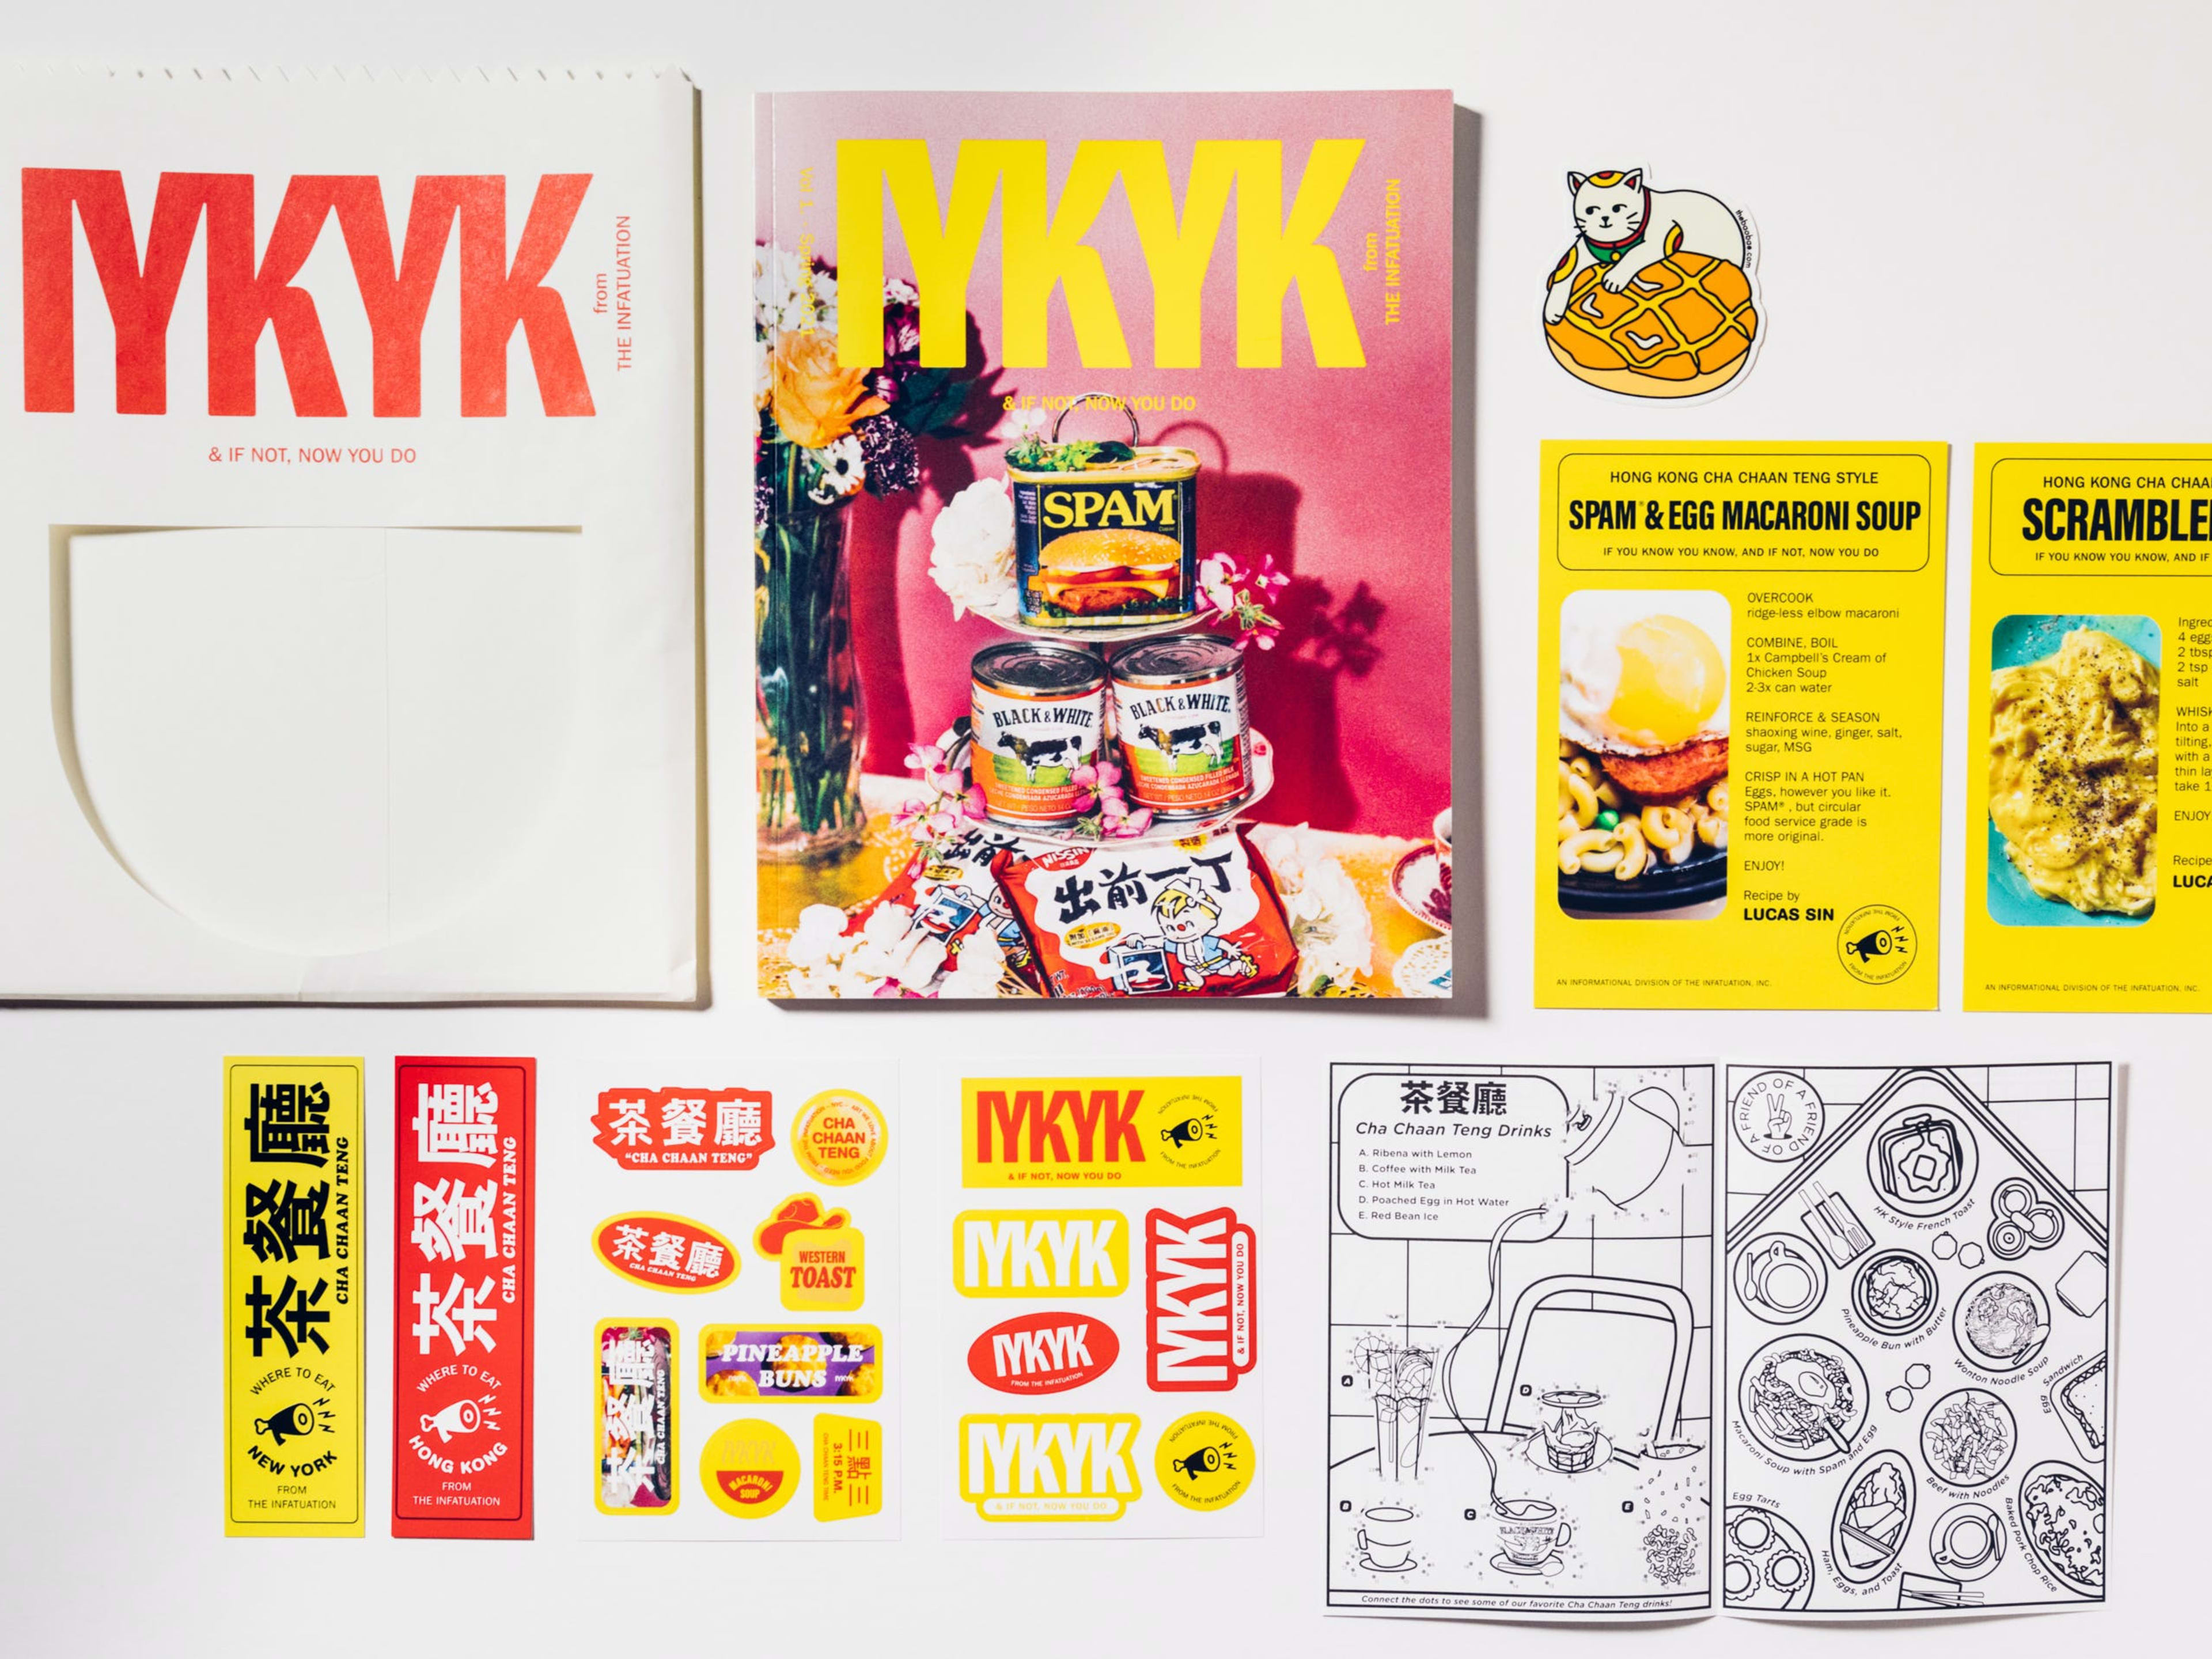 Introducing IYKYK, A Zine From The Infatuation image